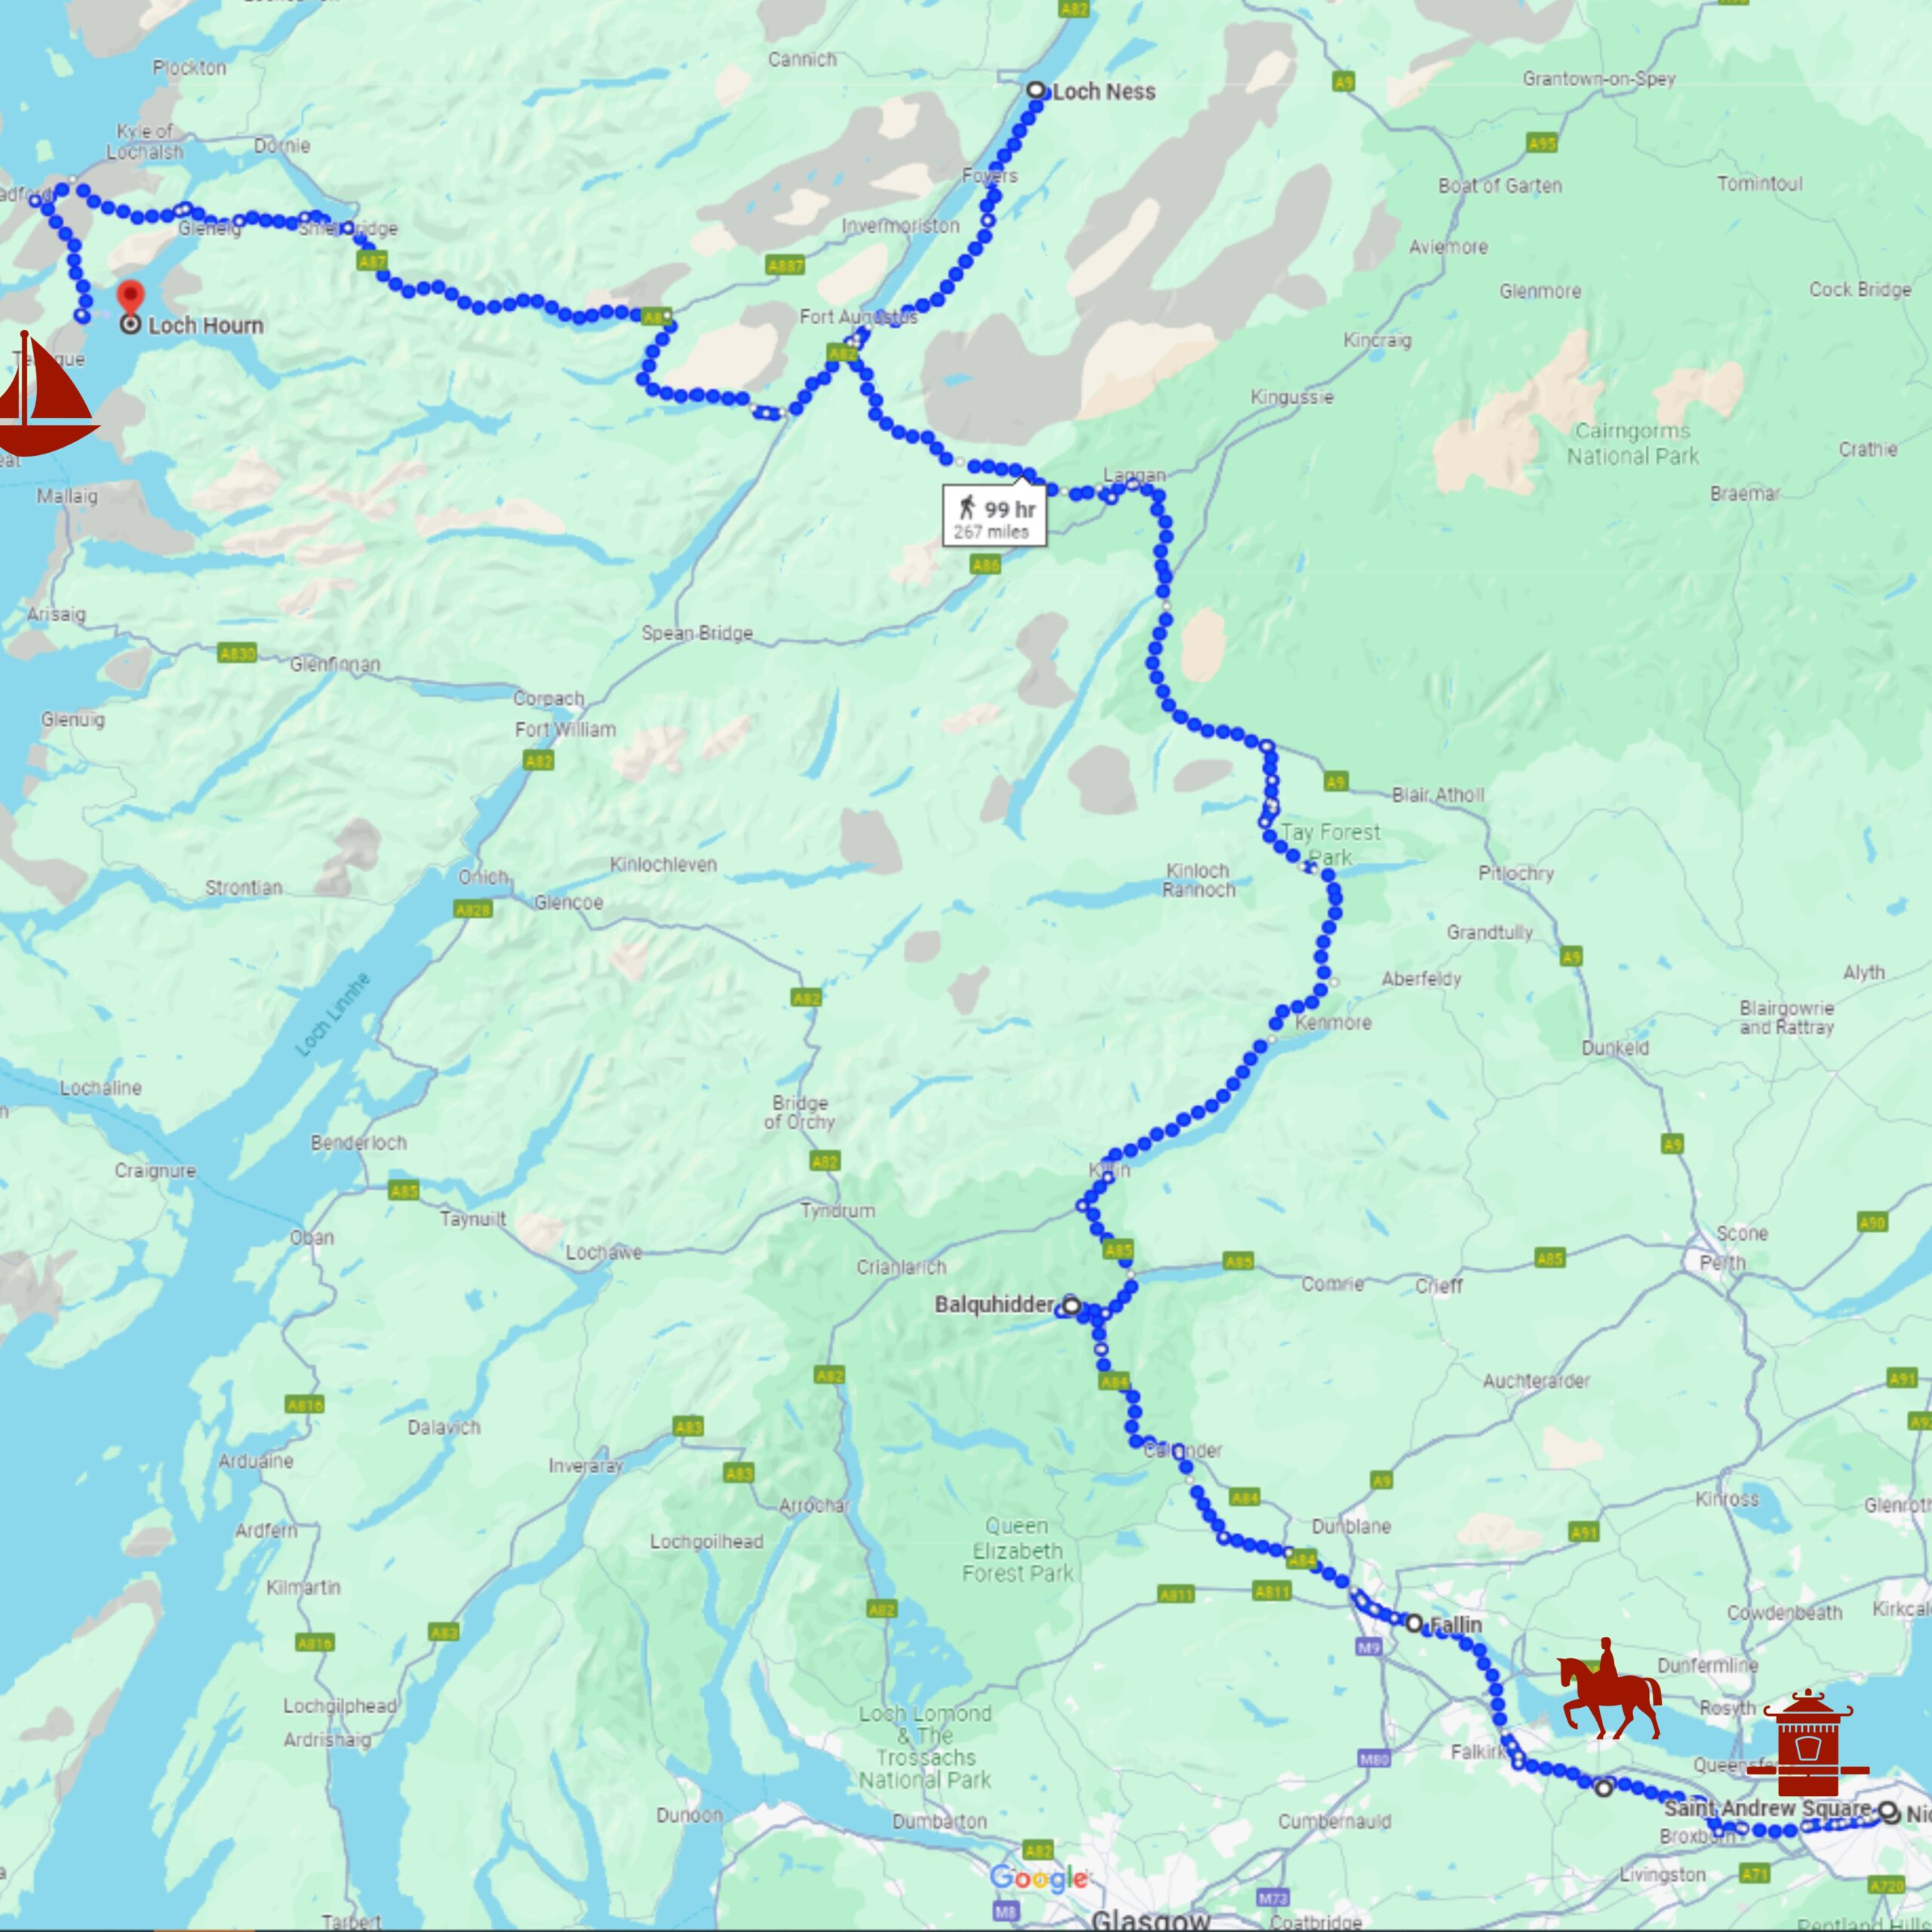 A Google Maps map showing the route Lady Grange and her captors took out of Edinburgh to Linlithgow to Stirling then further up to Loch Ness and then West to Loch Hourn